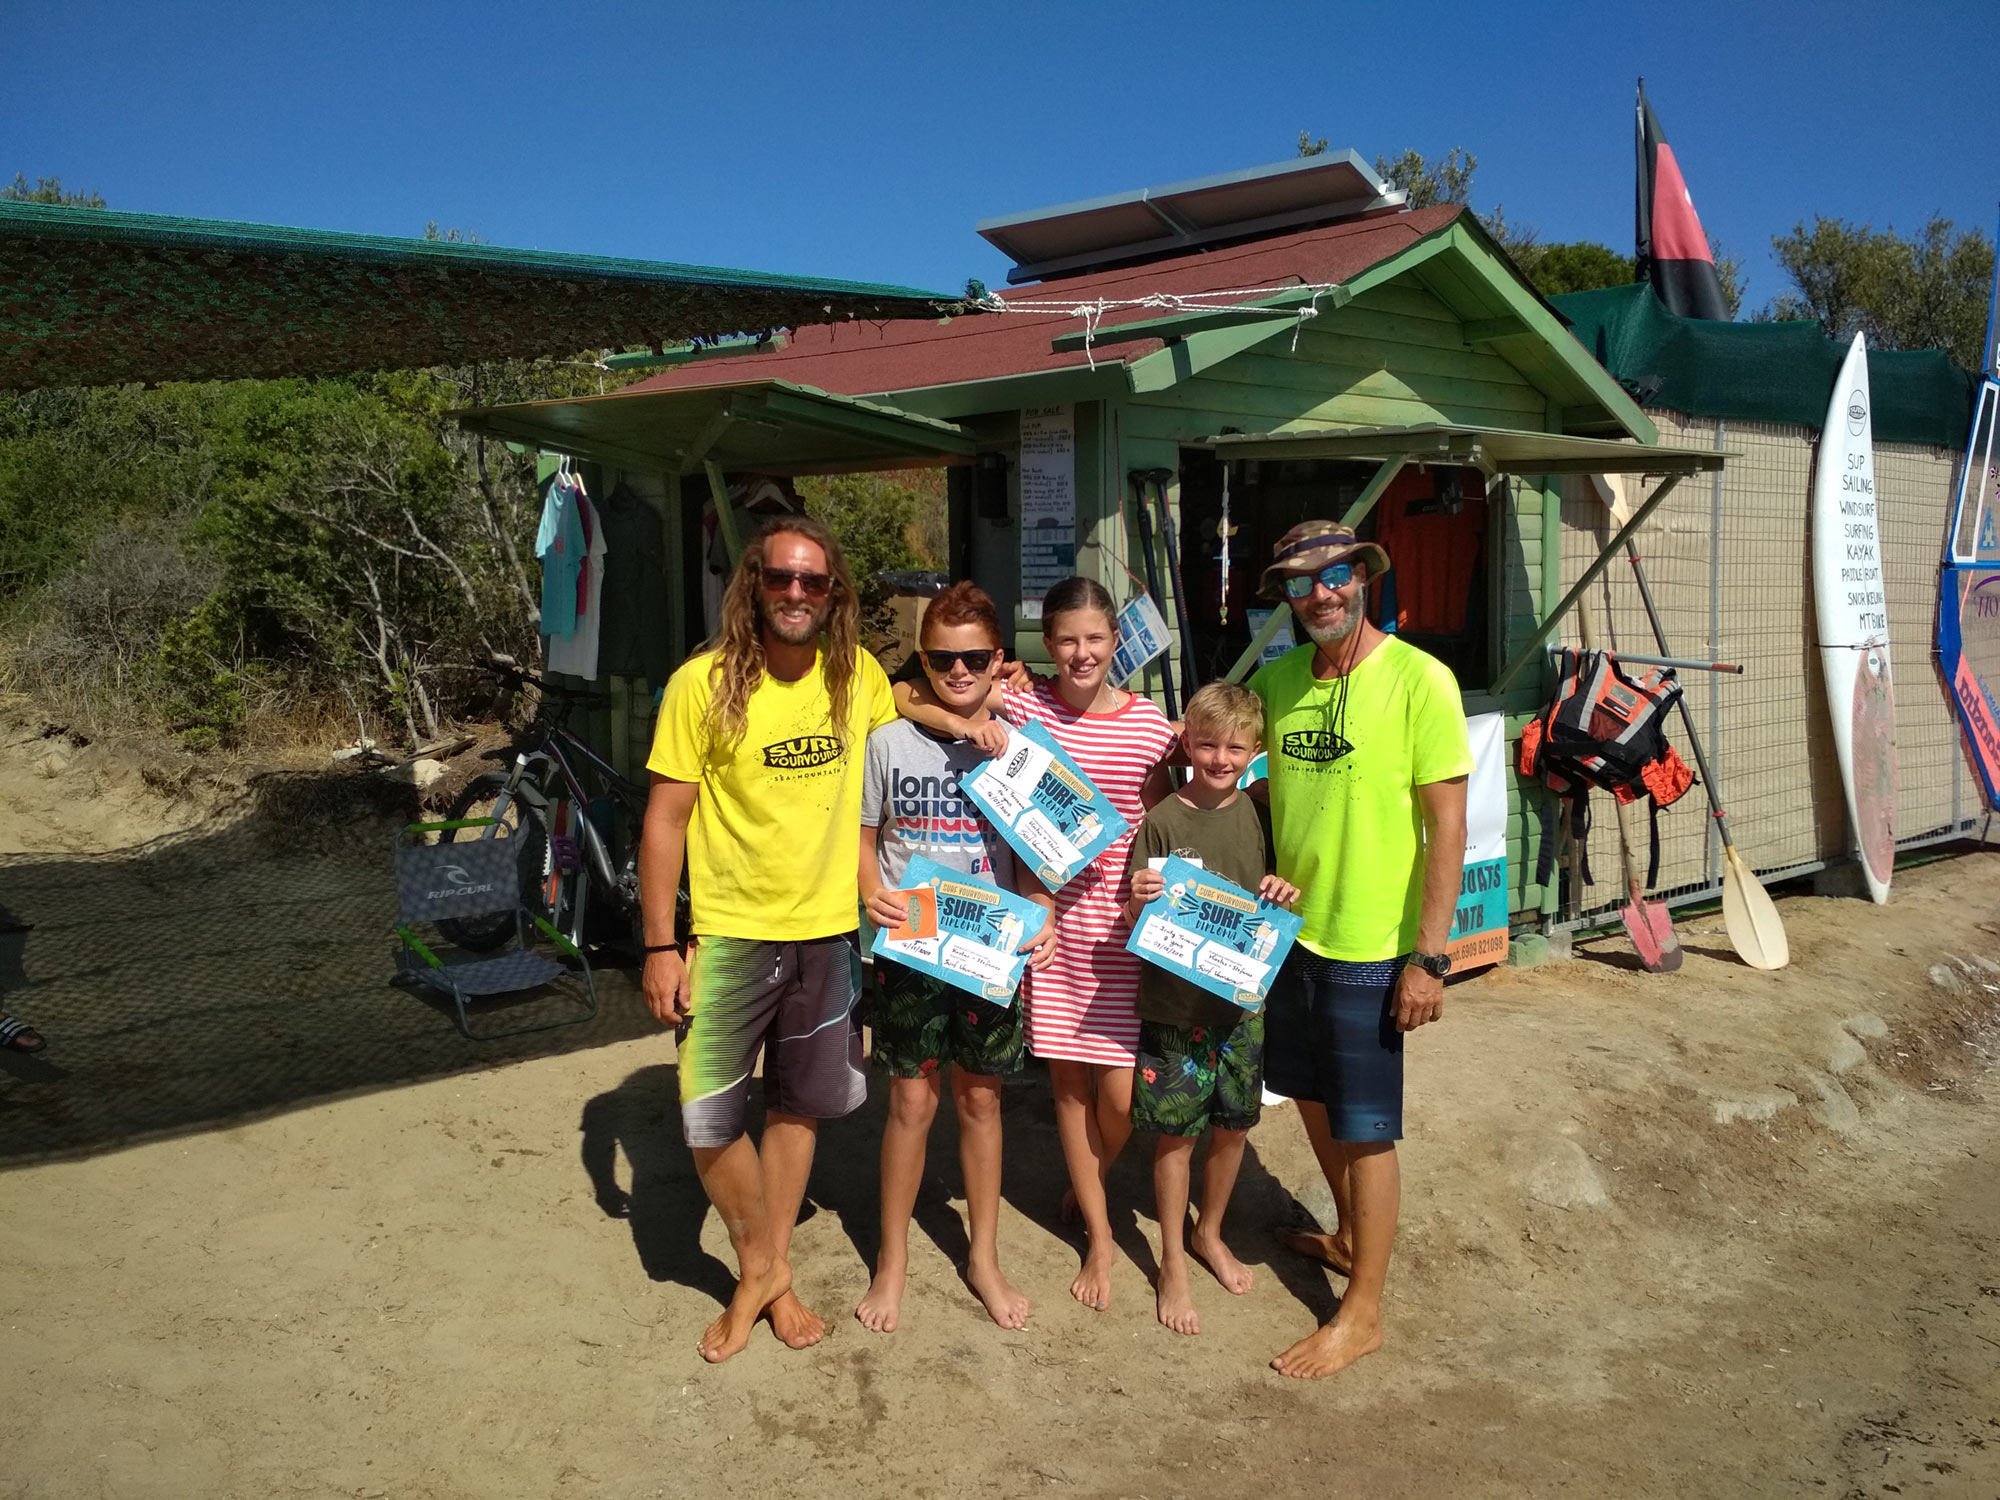 Surfing instructors and their students